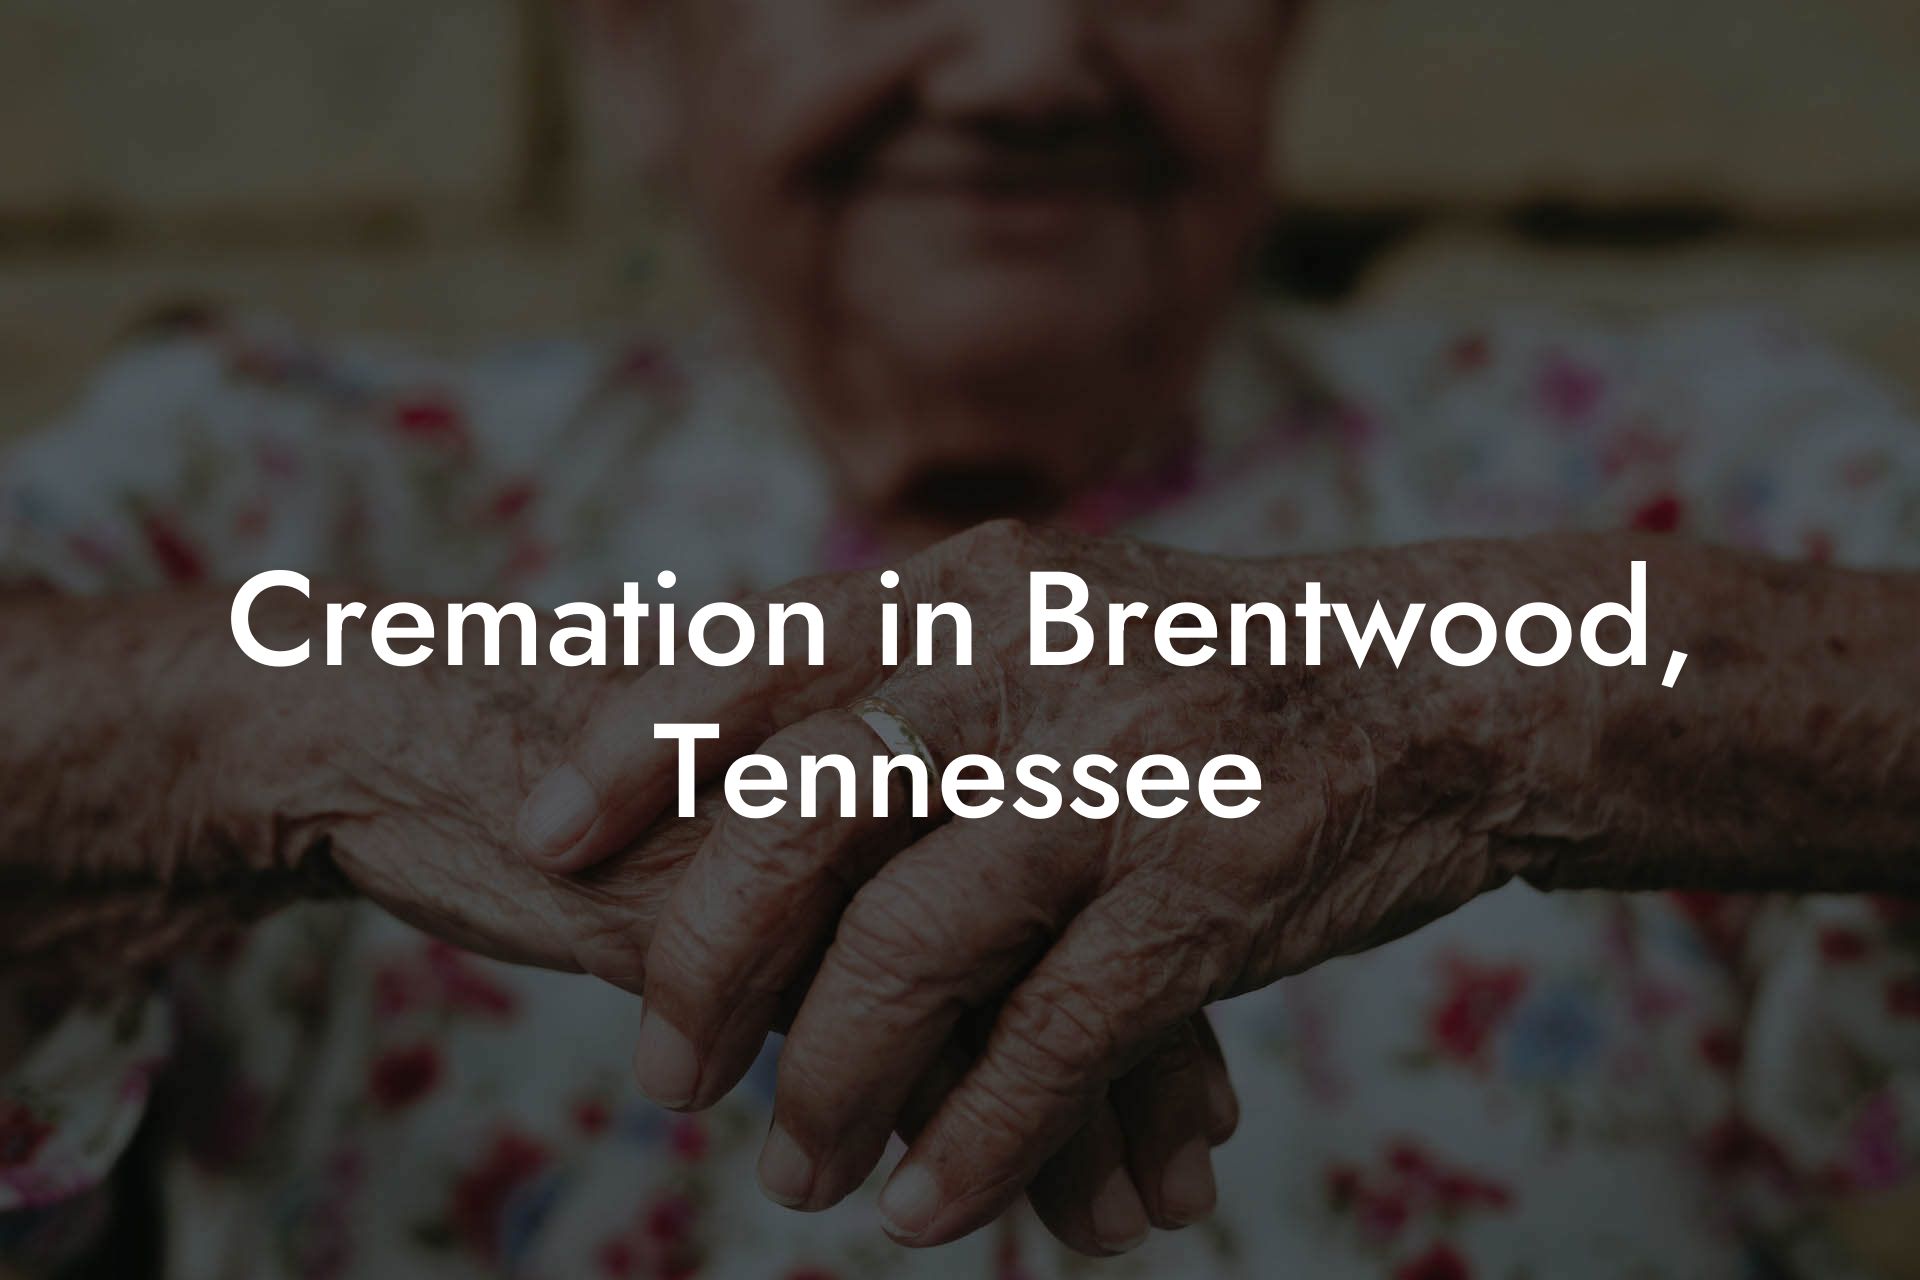 Cremation in Brentwood, Tennessee